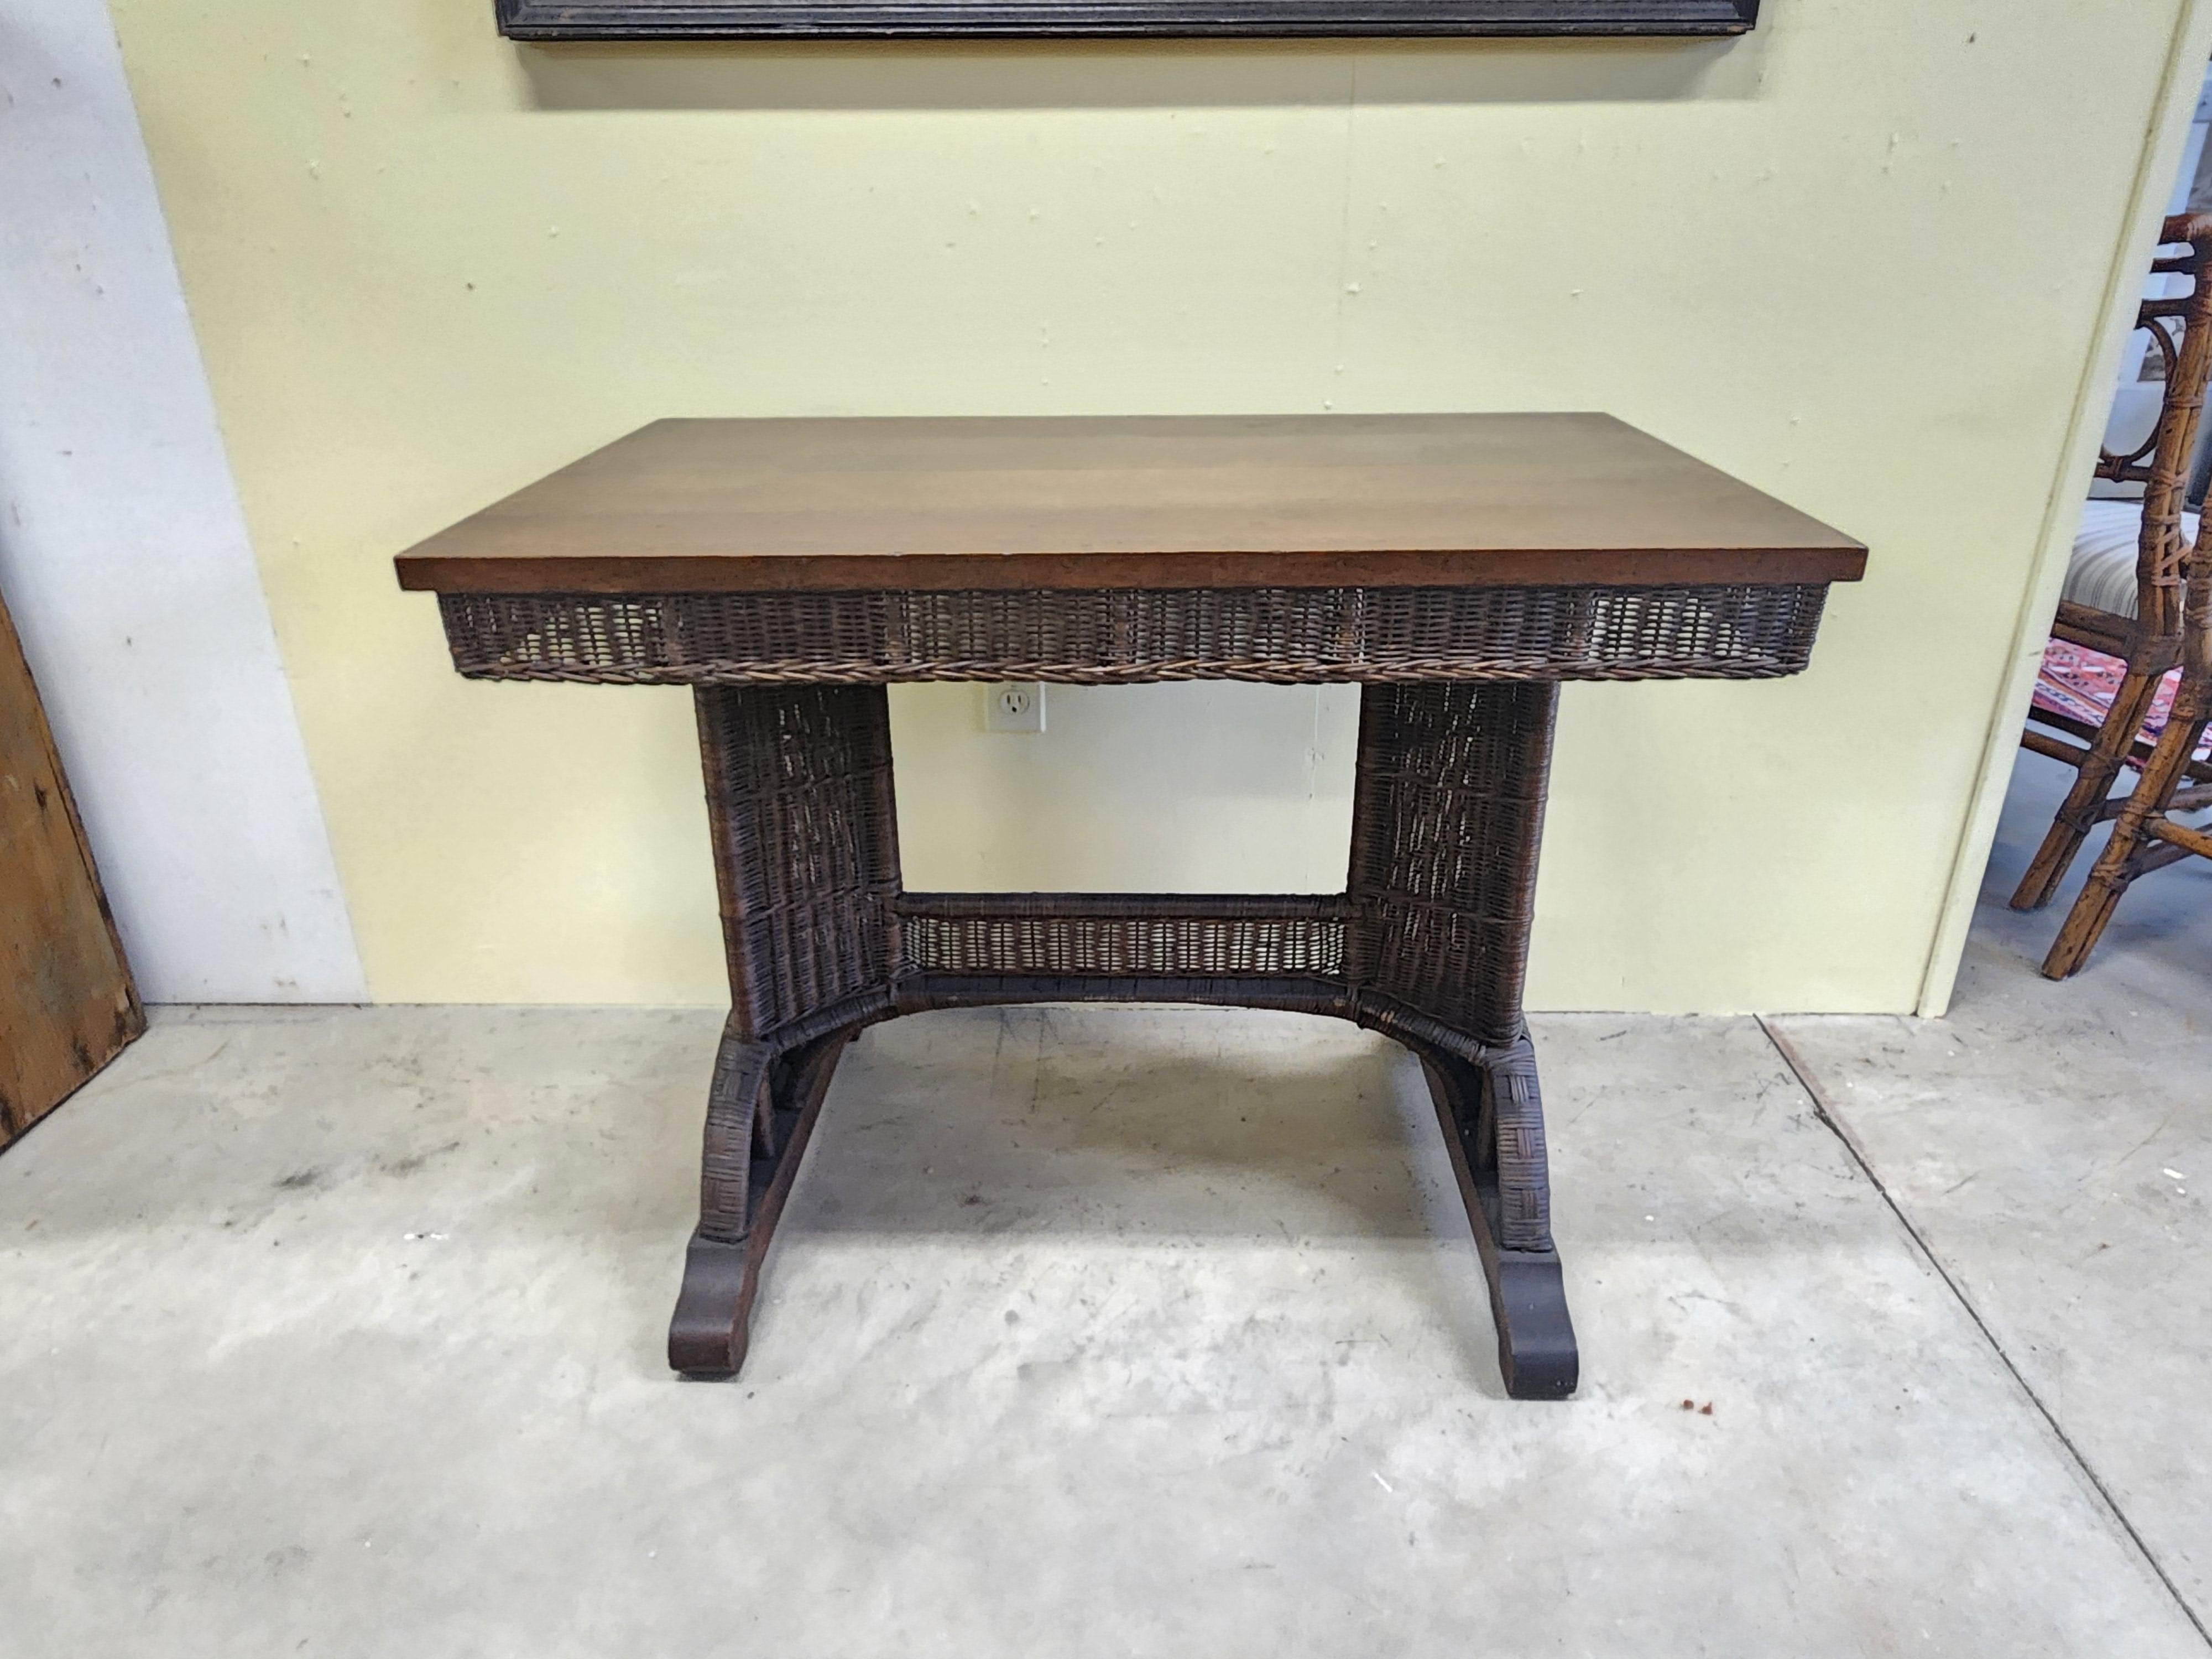 19th Century Beautiful Architectural Wicker Table with Quartersawn Oak Top